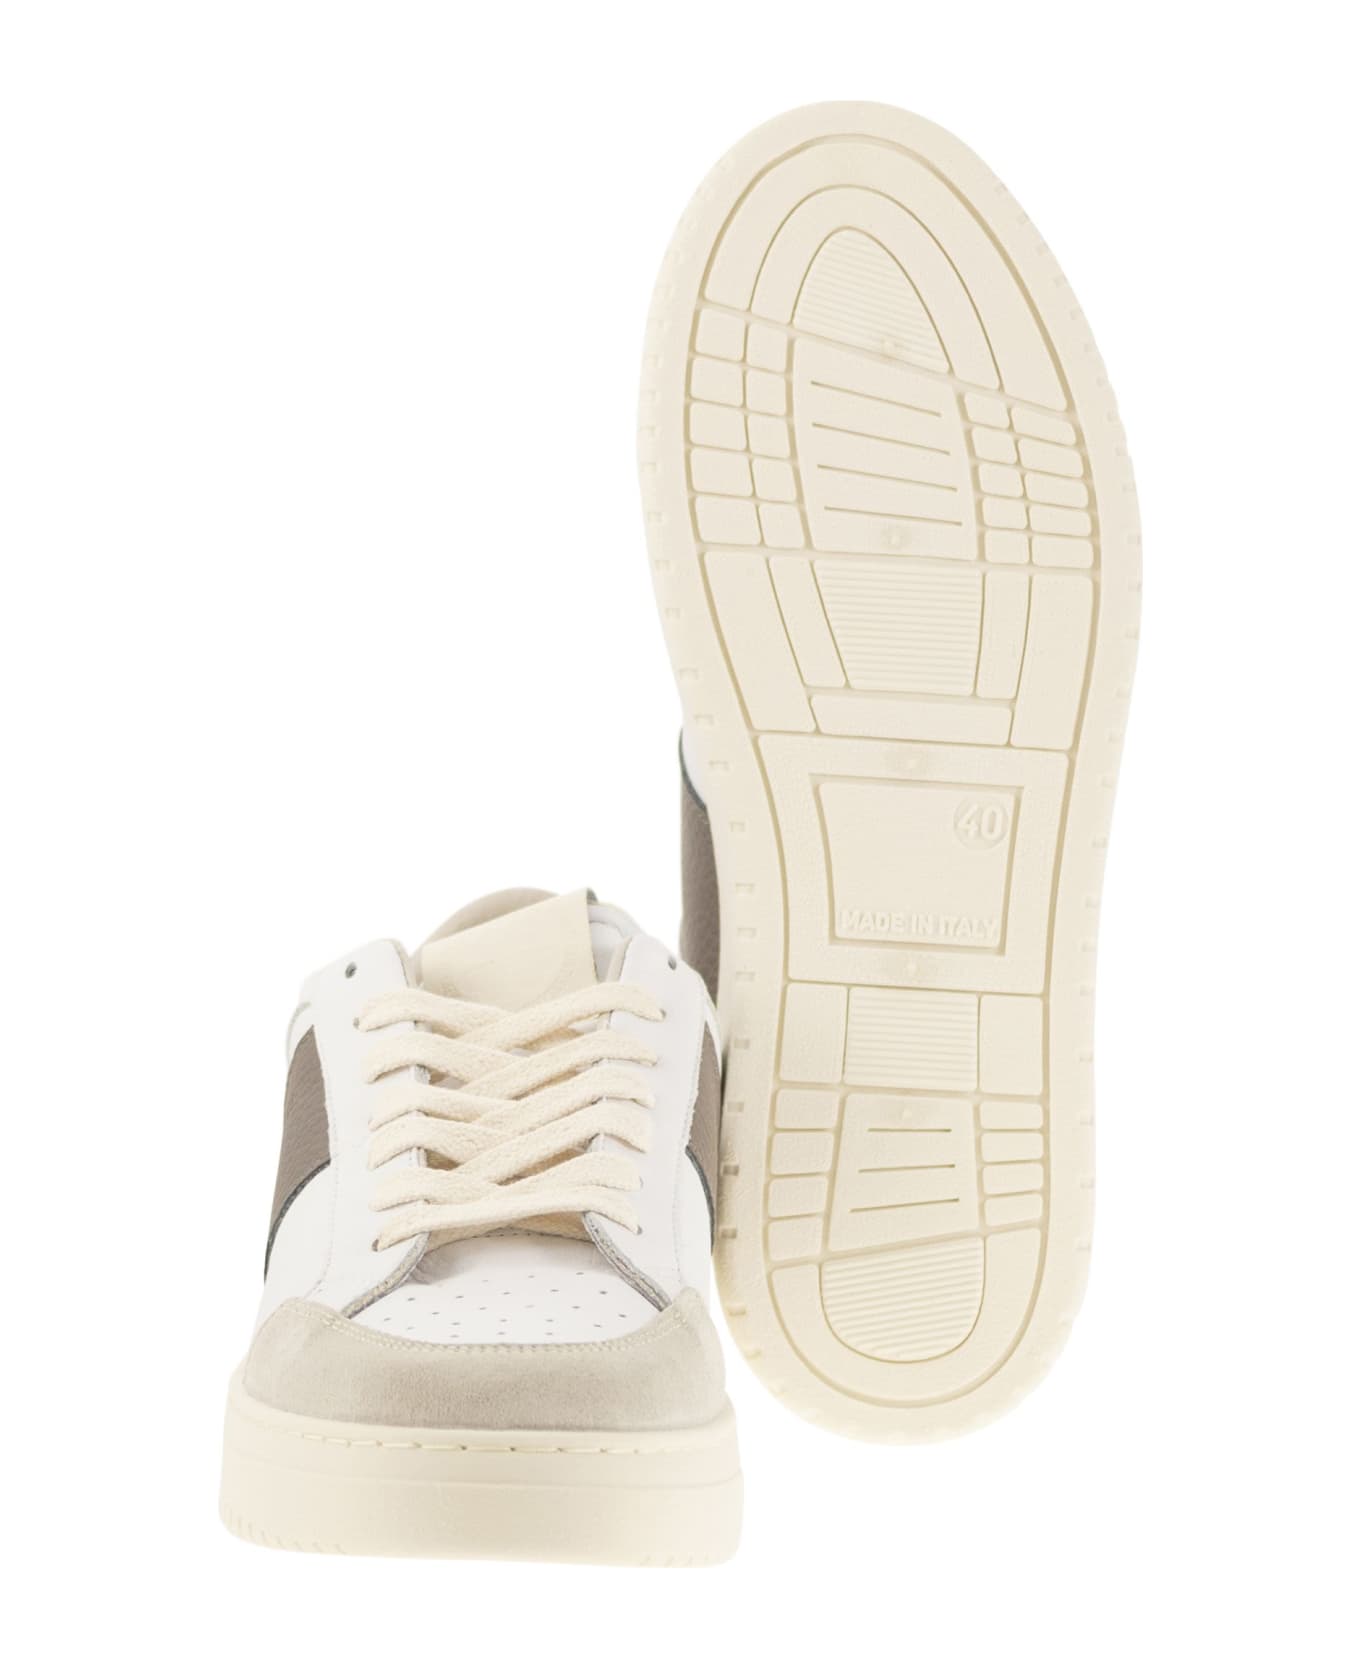 Saint Sneakers Sail - Leather And Suede Trainers - White/grey